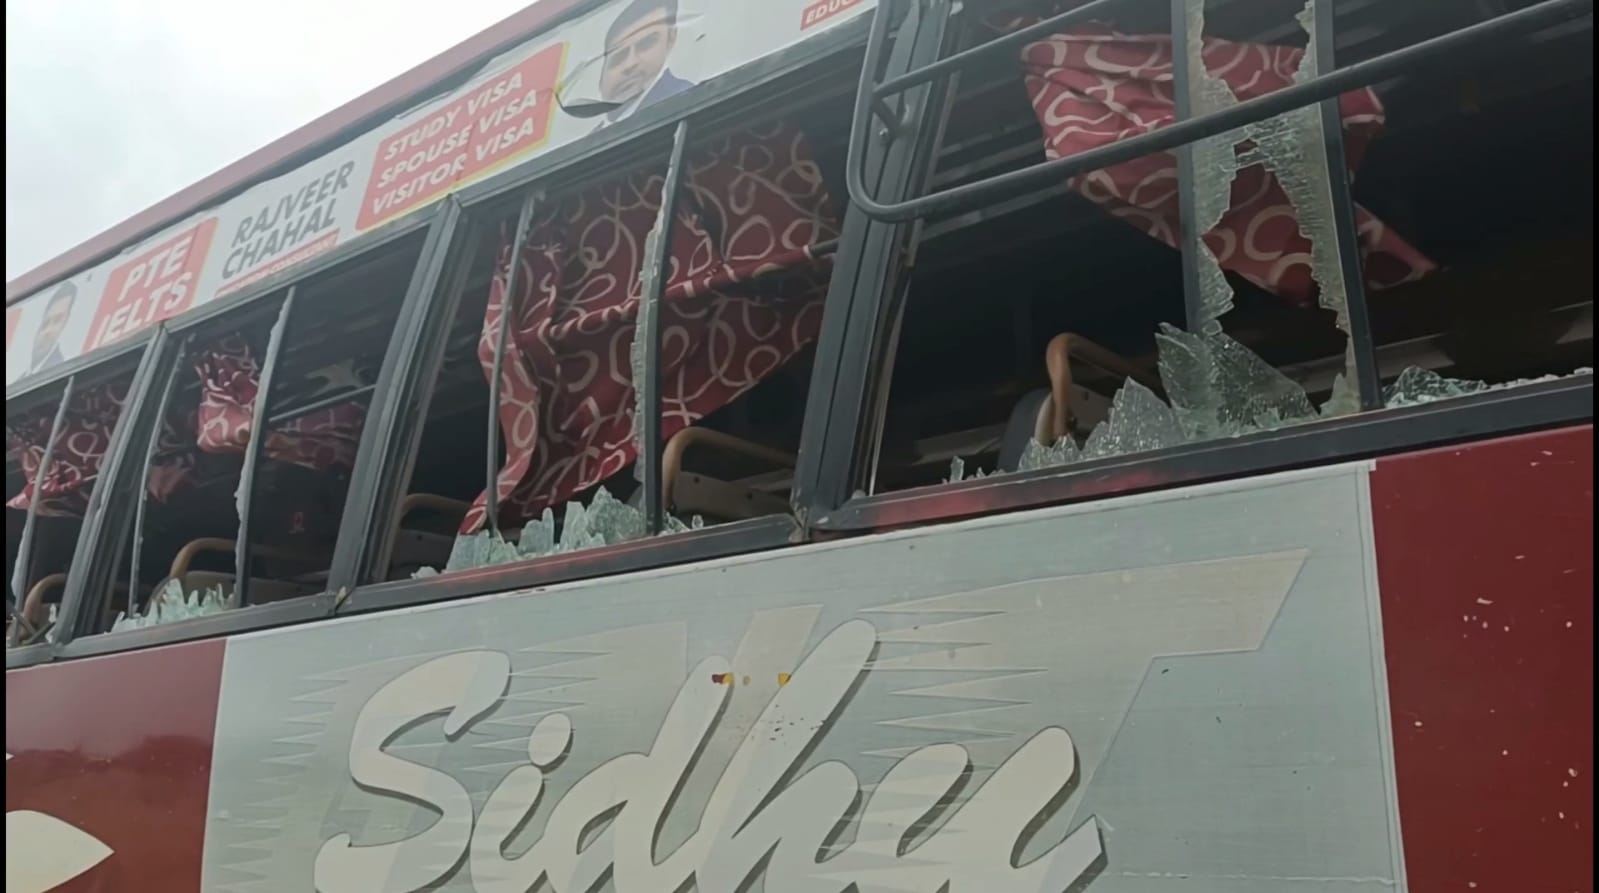 The bus going to Dera Sirsa Satsang met with an accident